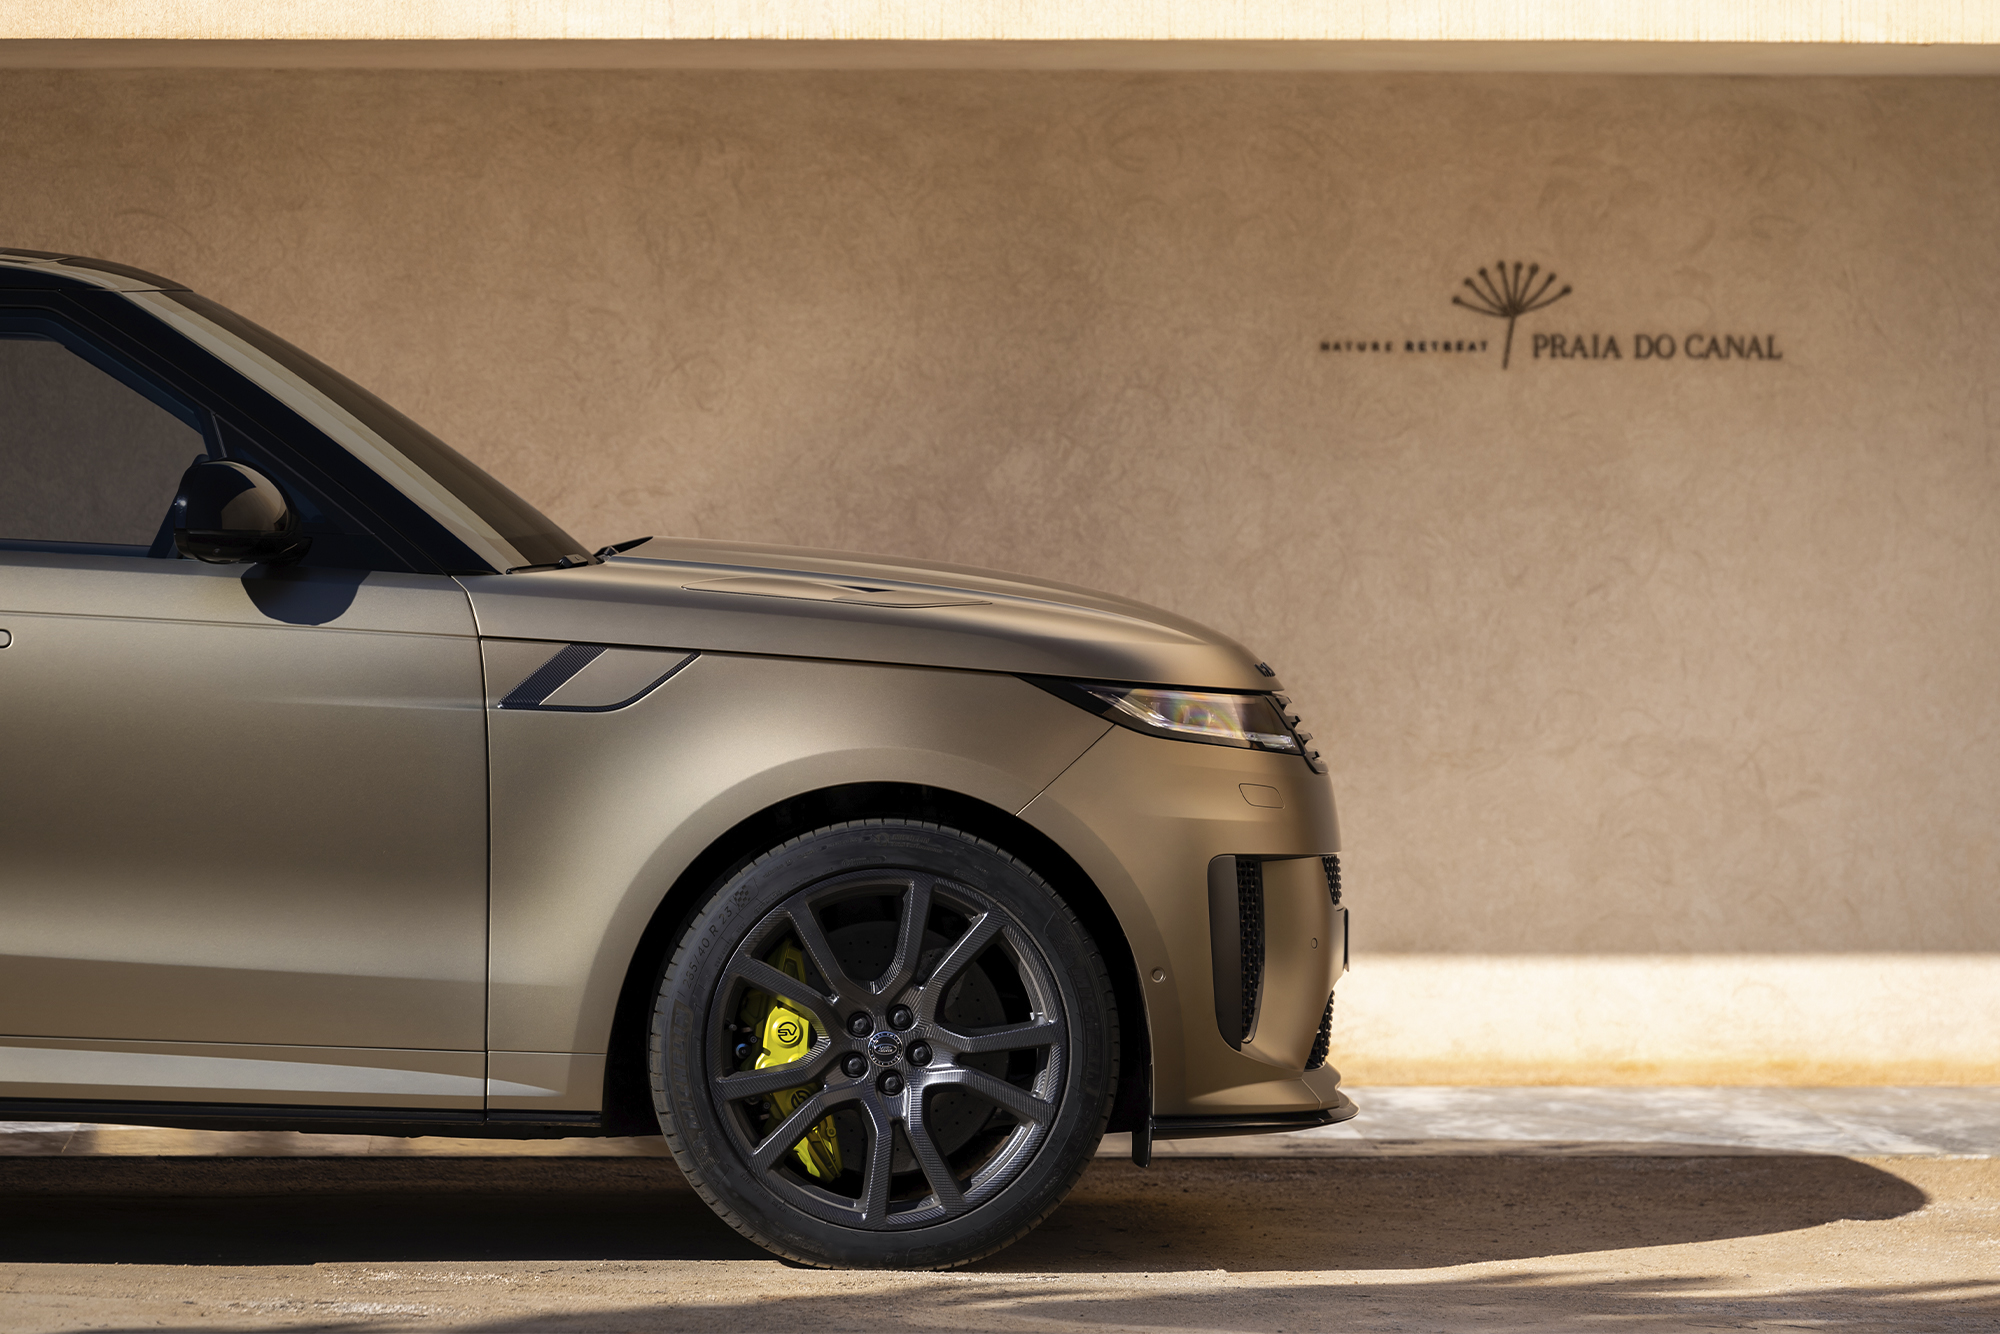 On Track in the 2024 Range Rover Sport SV